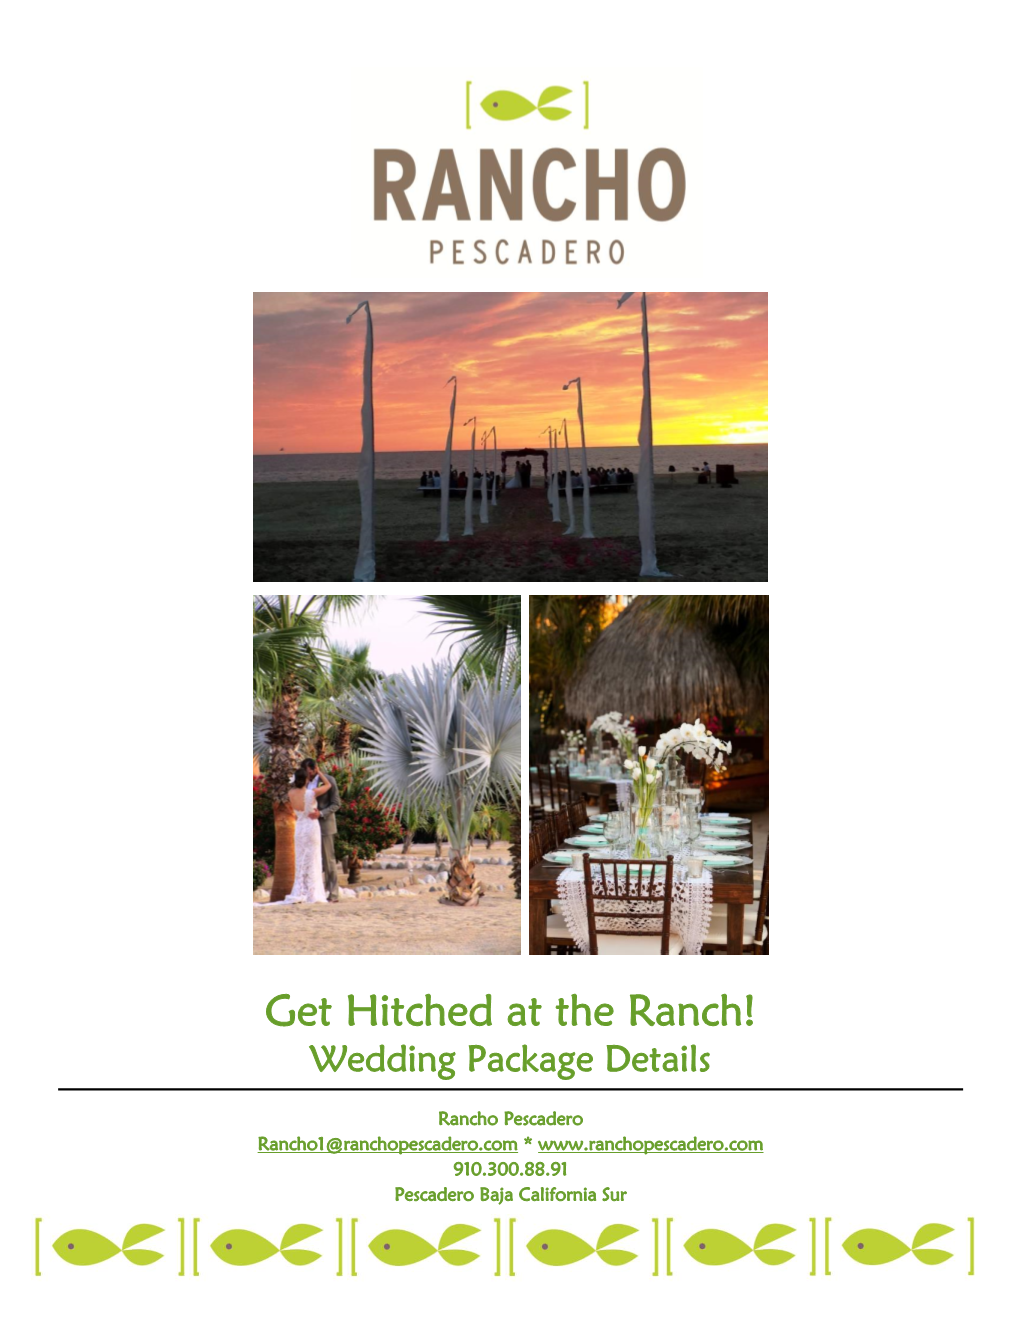 Get Hitched at the Ranch! Wedding Package Details